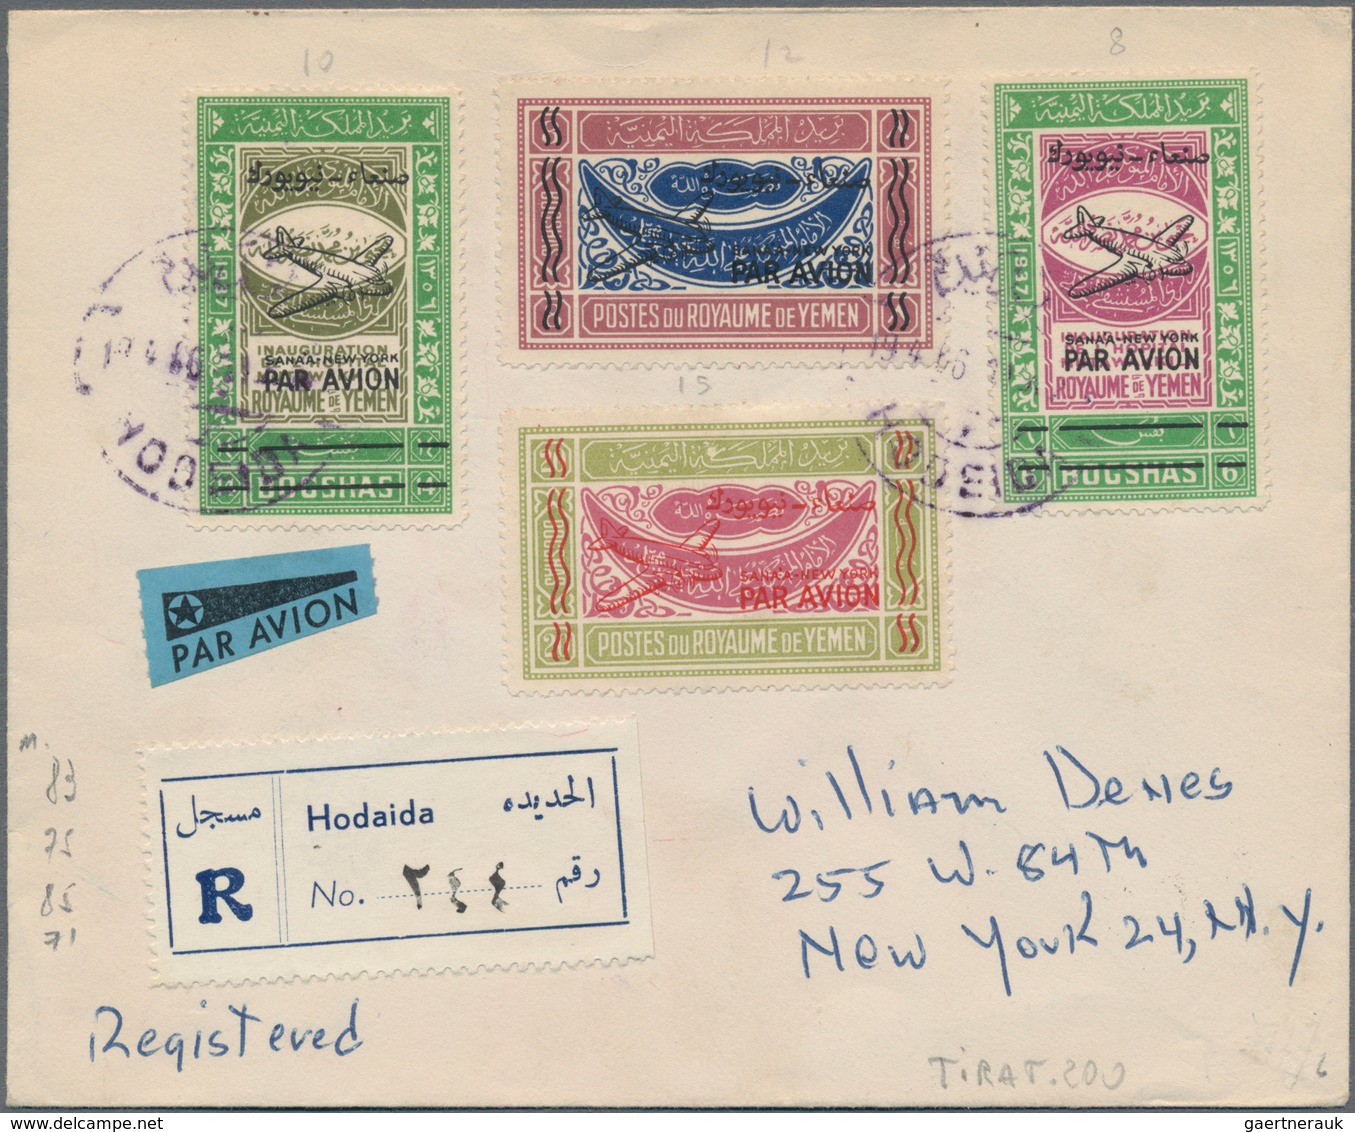 Jemen: 1947 Air Stamps 6b, 8b, 14b And 20b With Overprints For Prince's Flight From Sanaa, Used On R - Jemen